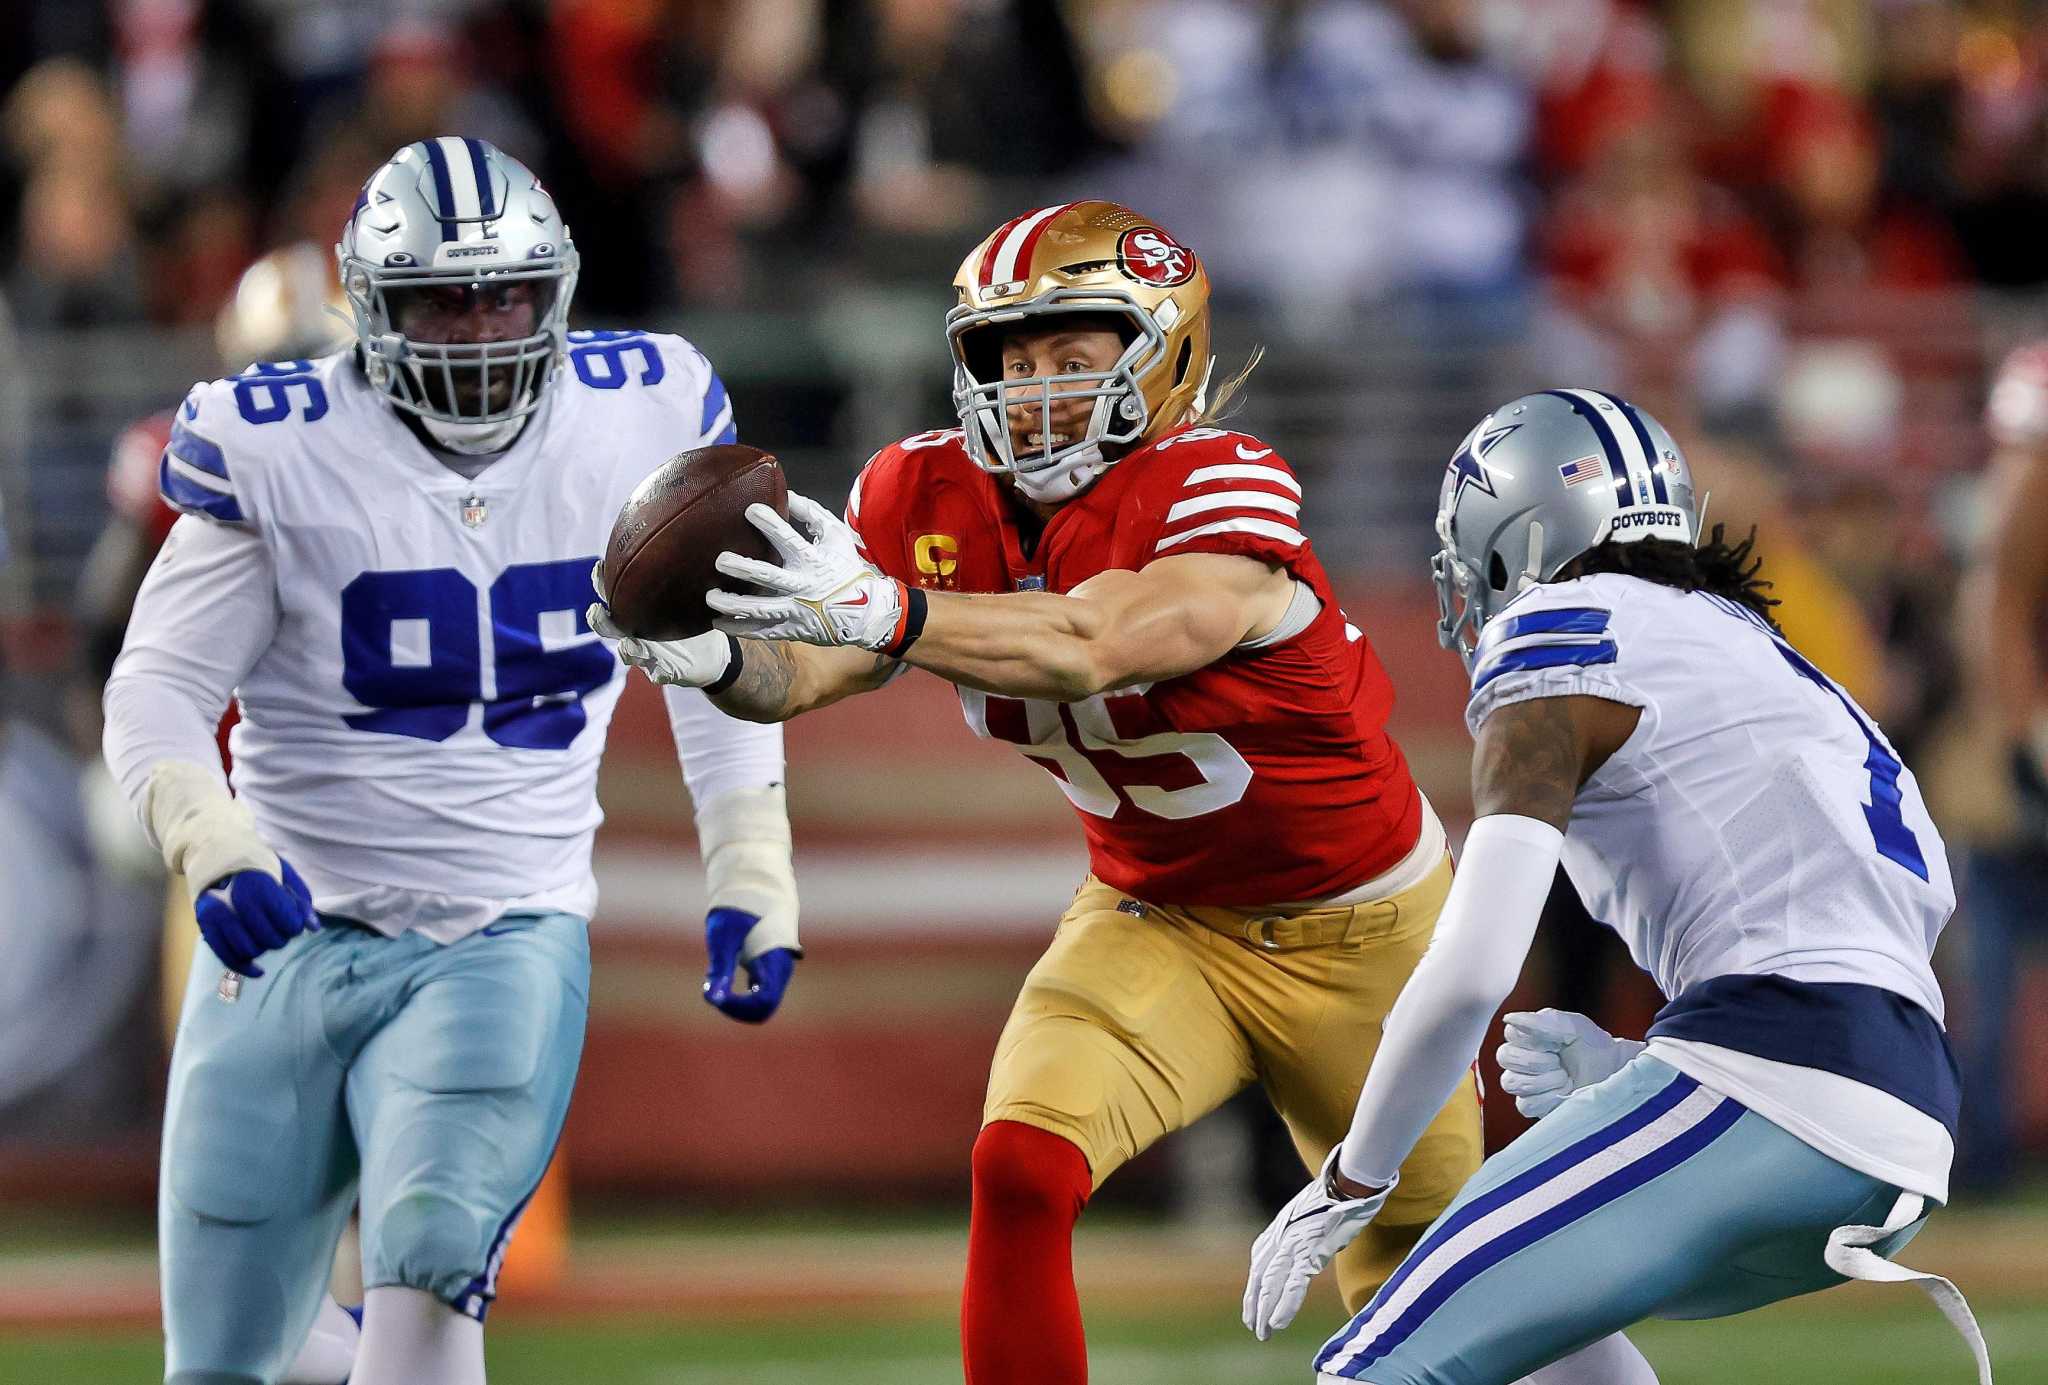 49ers, Cowboys meet again in NFL playoffs, what's happened before?